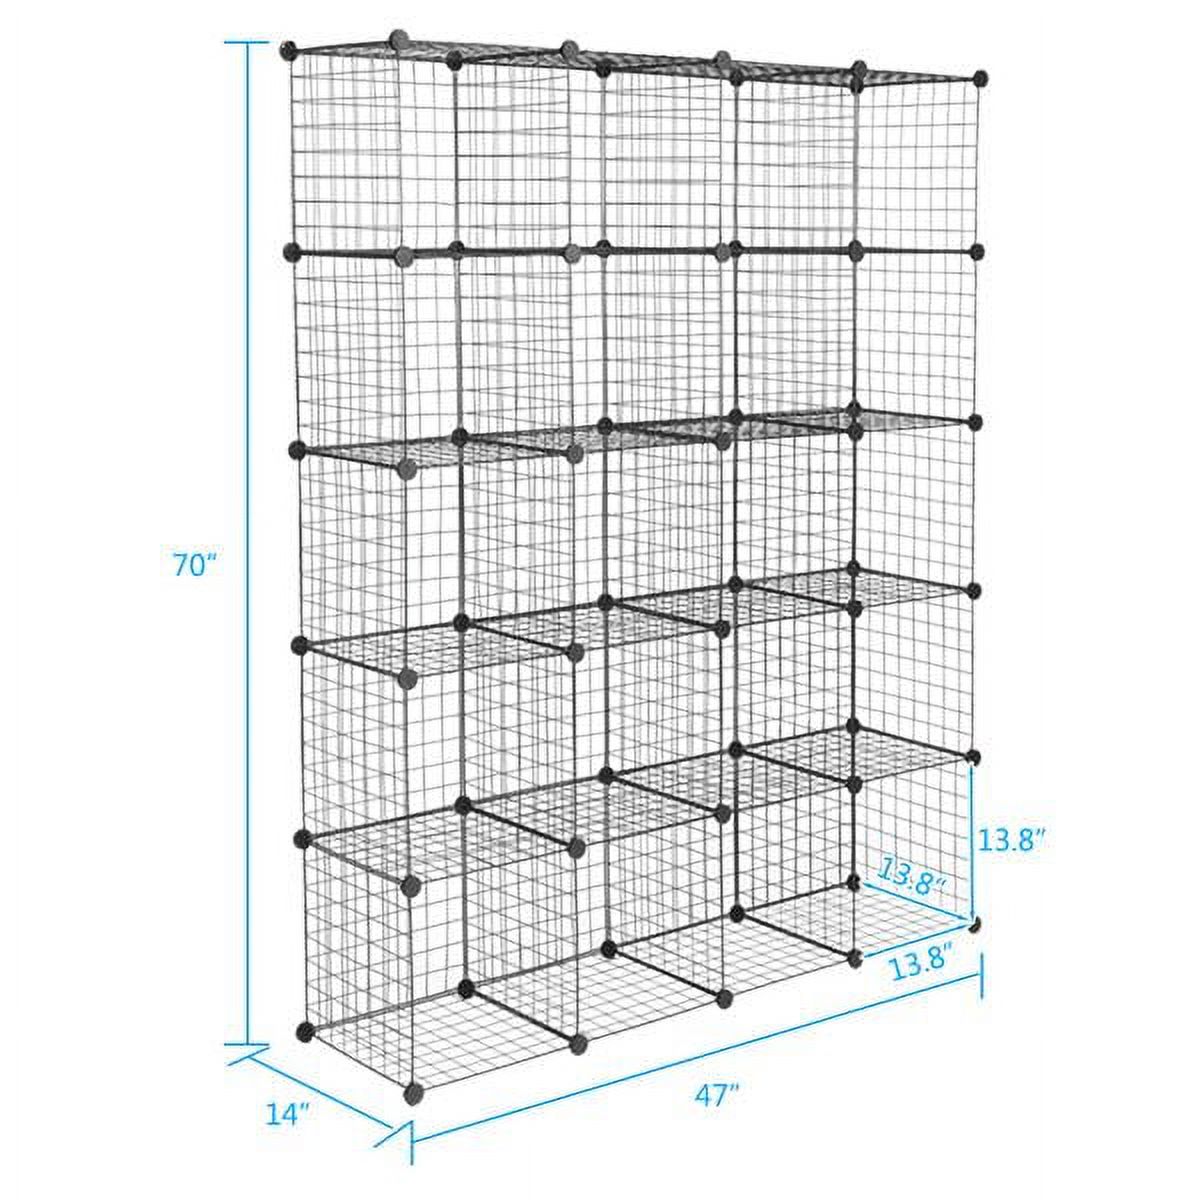 Cube Storage 20-Cube Metal Wire Cube Storage Cubes Shelves Cube Closet Organizer Stackable Storage Bins DIY Storage Grids Modular Wire Cubes Bookshelf Bookcase for Home Office - image 5 of 5